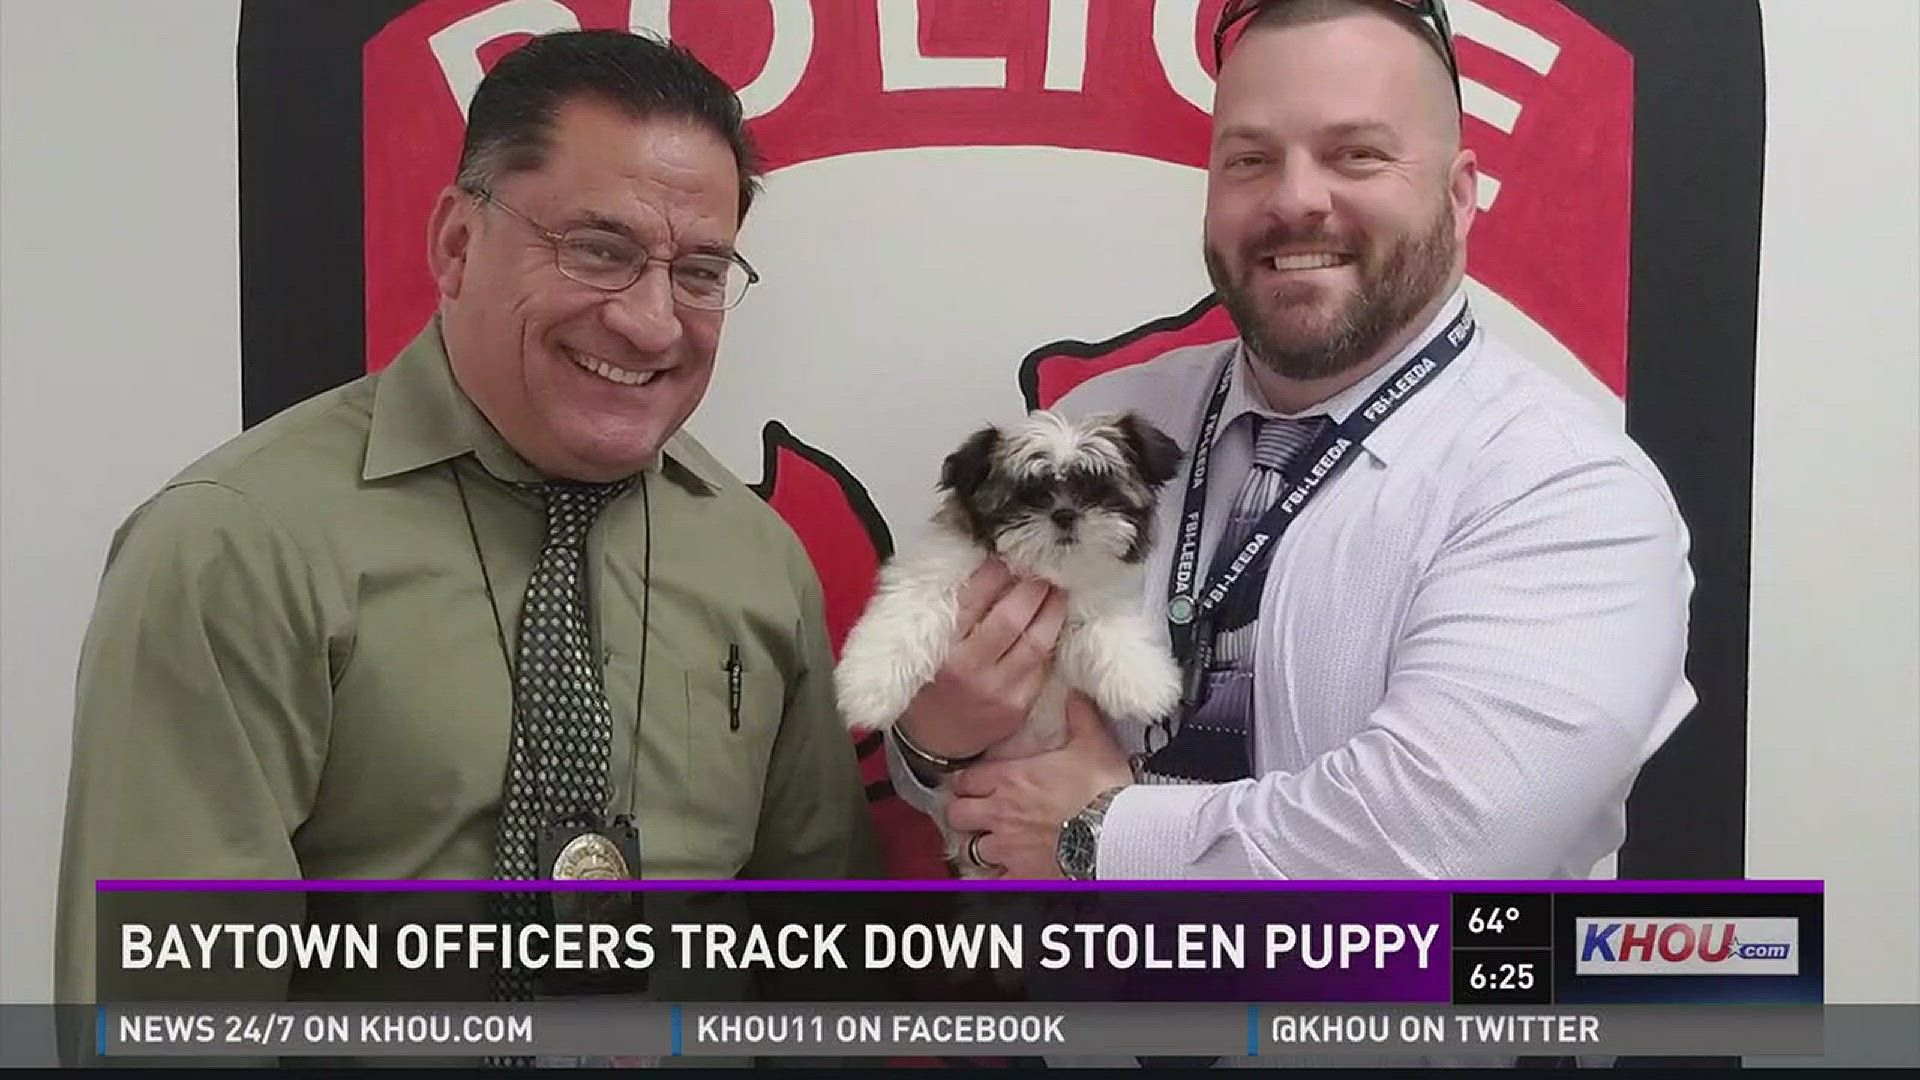 A North Carolina family will soon get their puppy back, thanks to Baytown police and Facebook users.